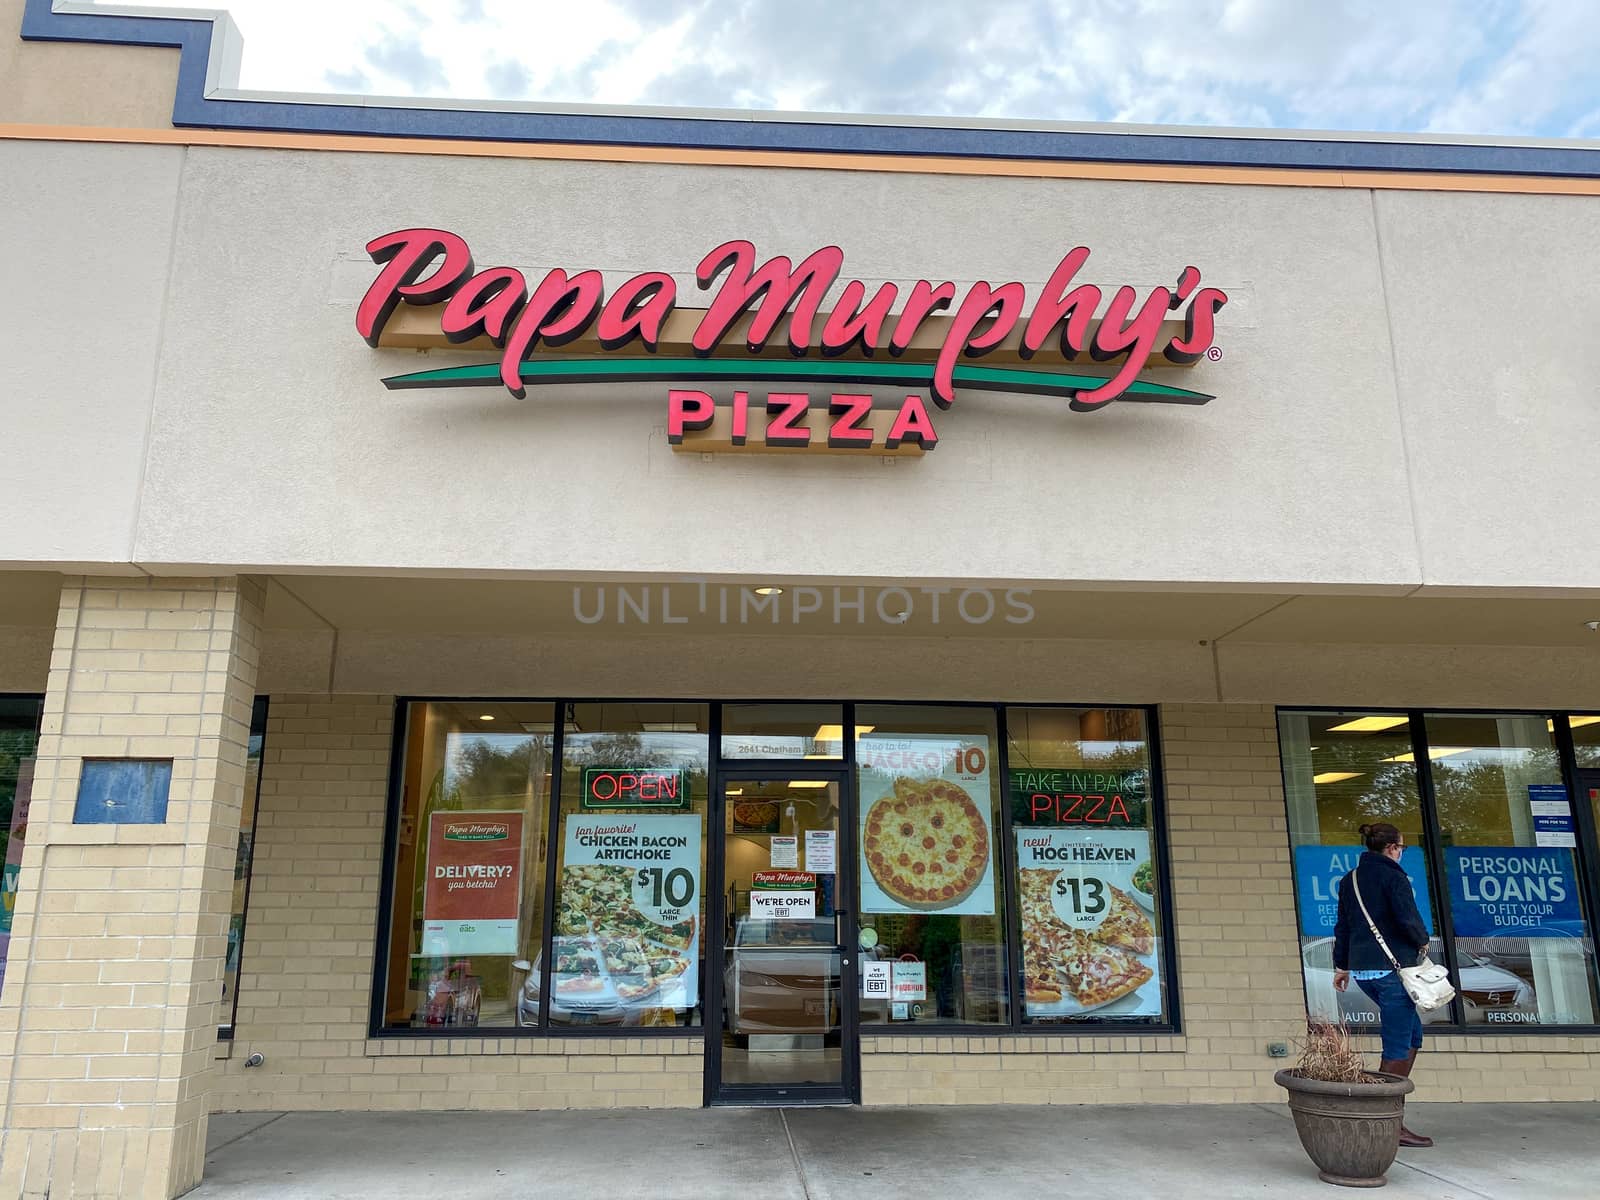 Springfield, IL/USA-10/2/20: The exterior of a Papa Murphys carry out pizza restaurant retail store in Springfield, IL.